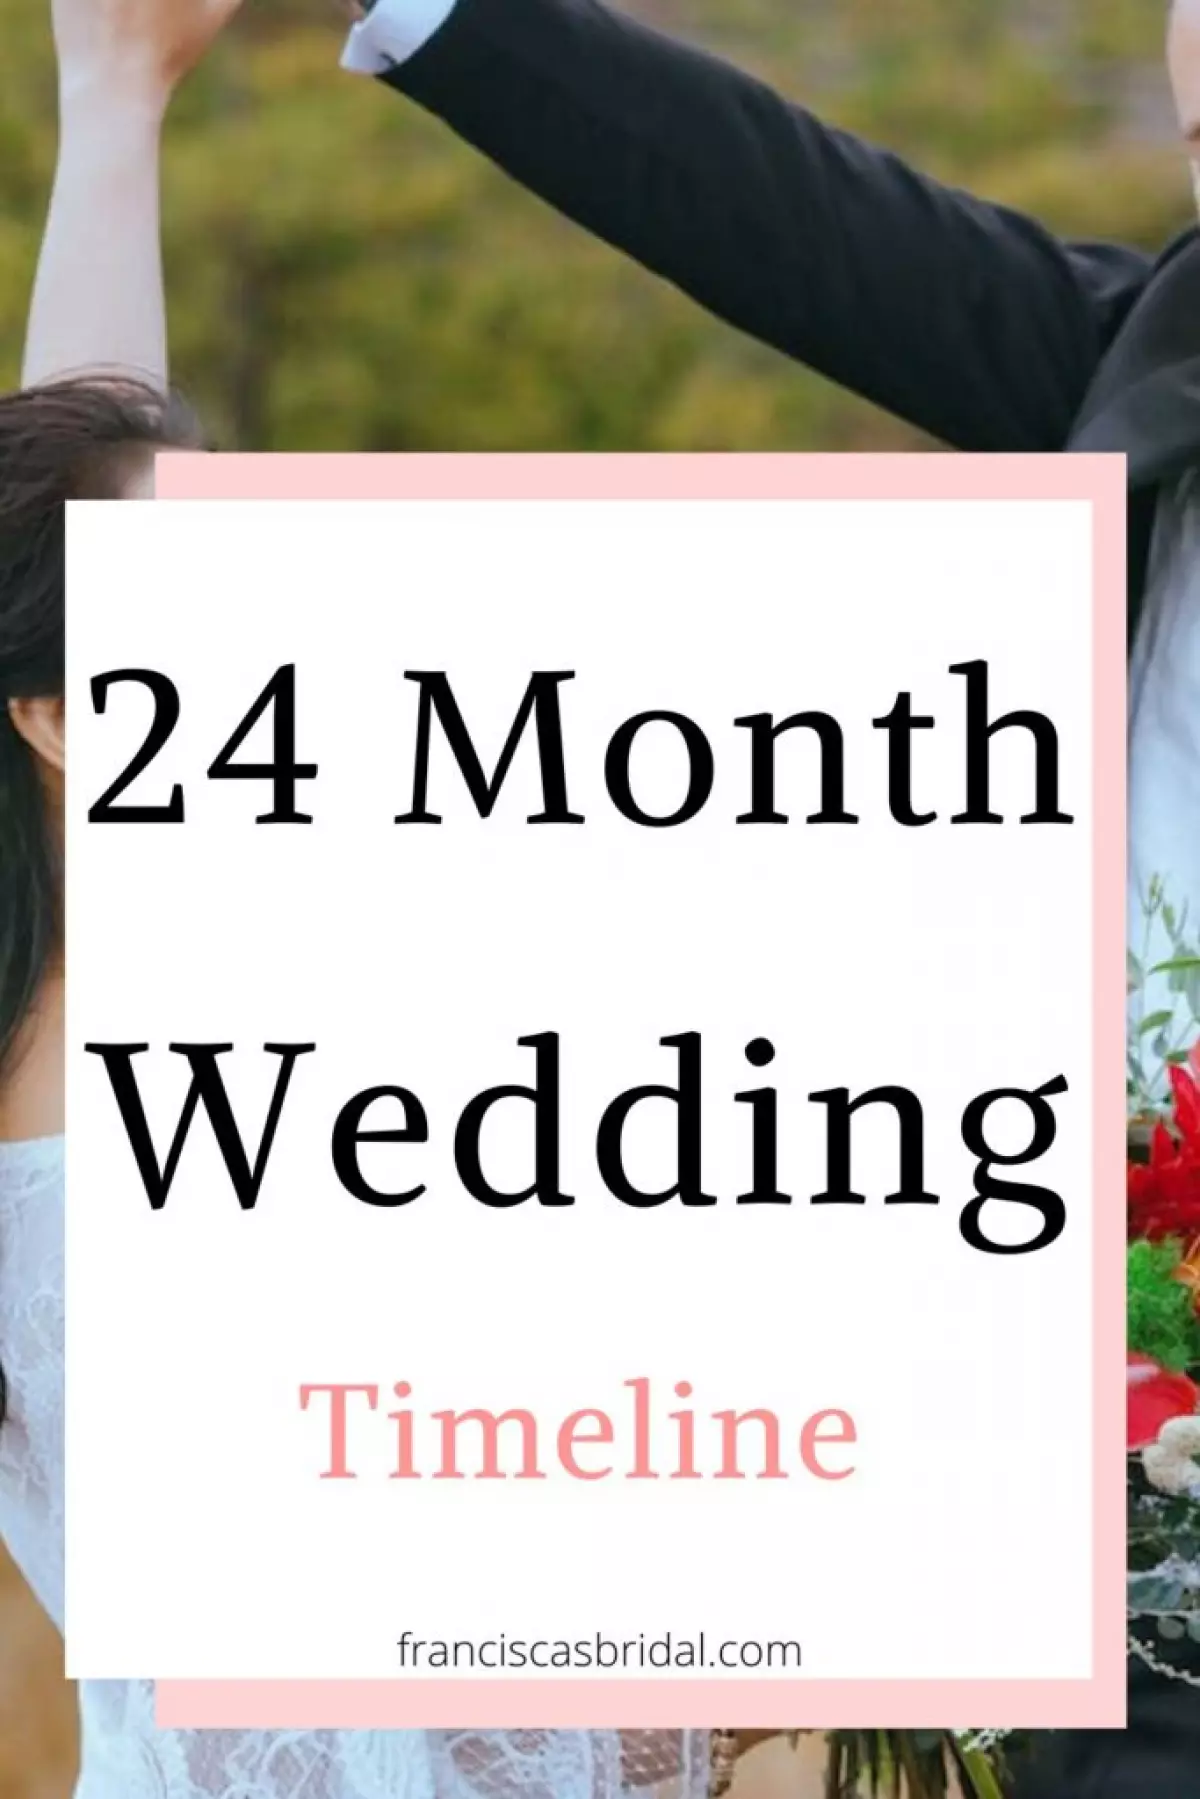 A bride and groom with text over the photo that says 24 month wedding planning timeline.